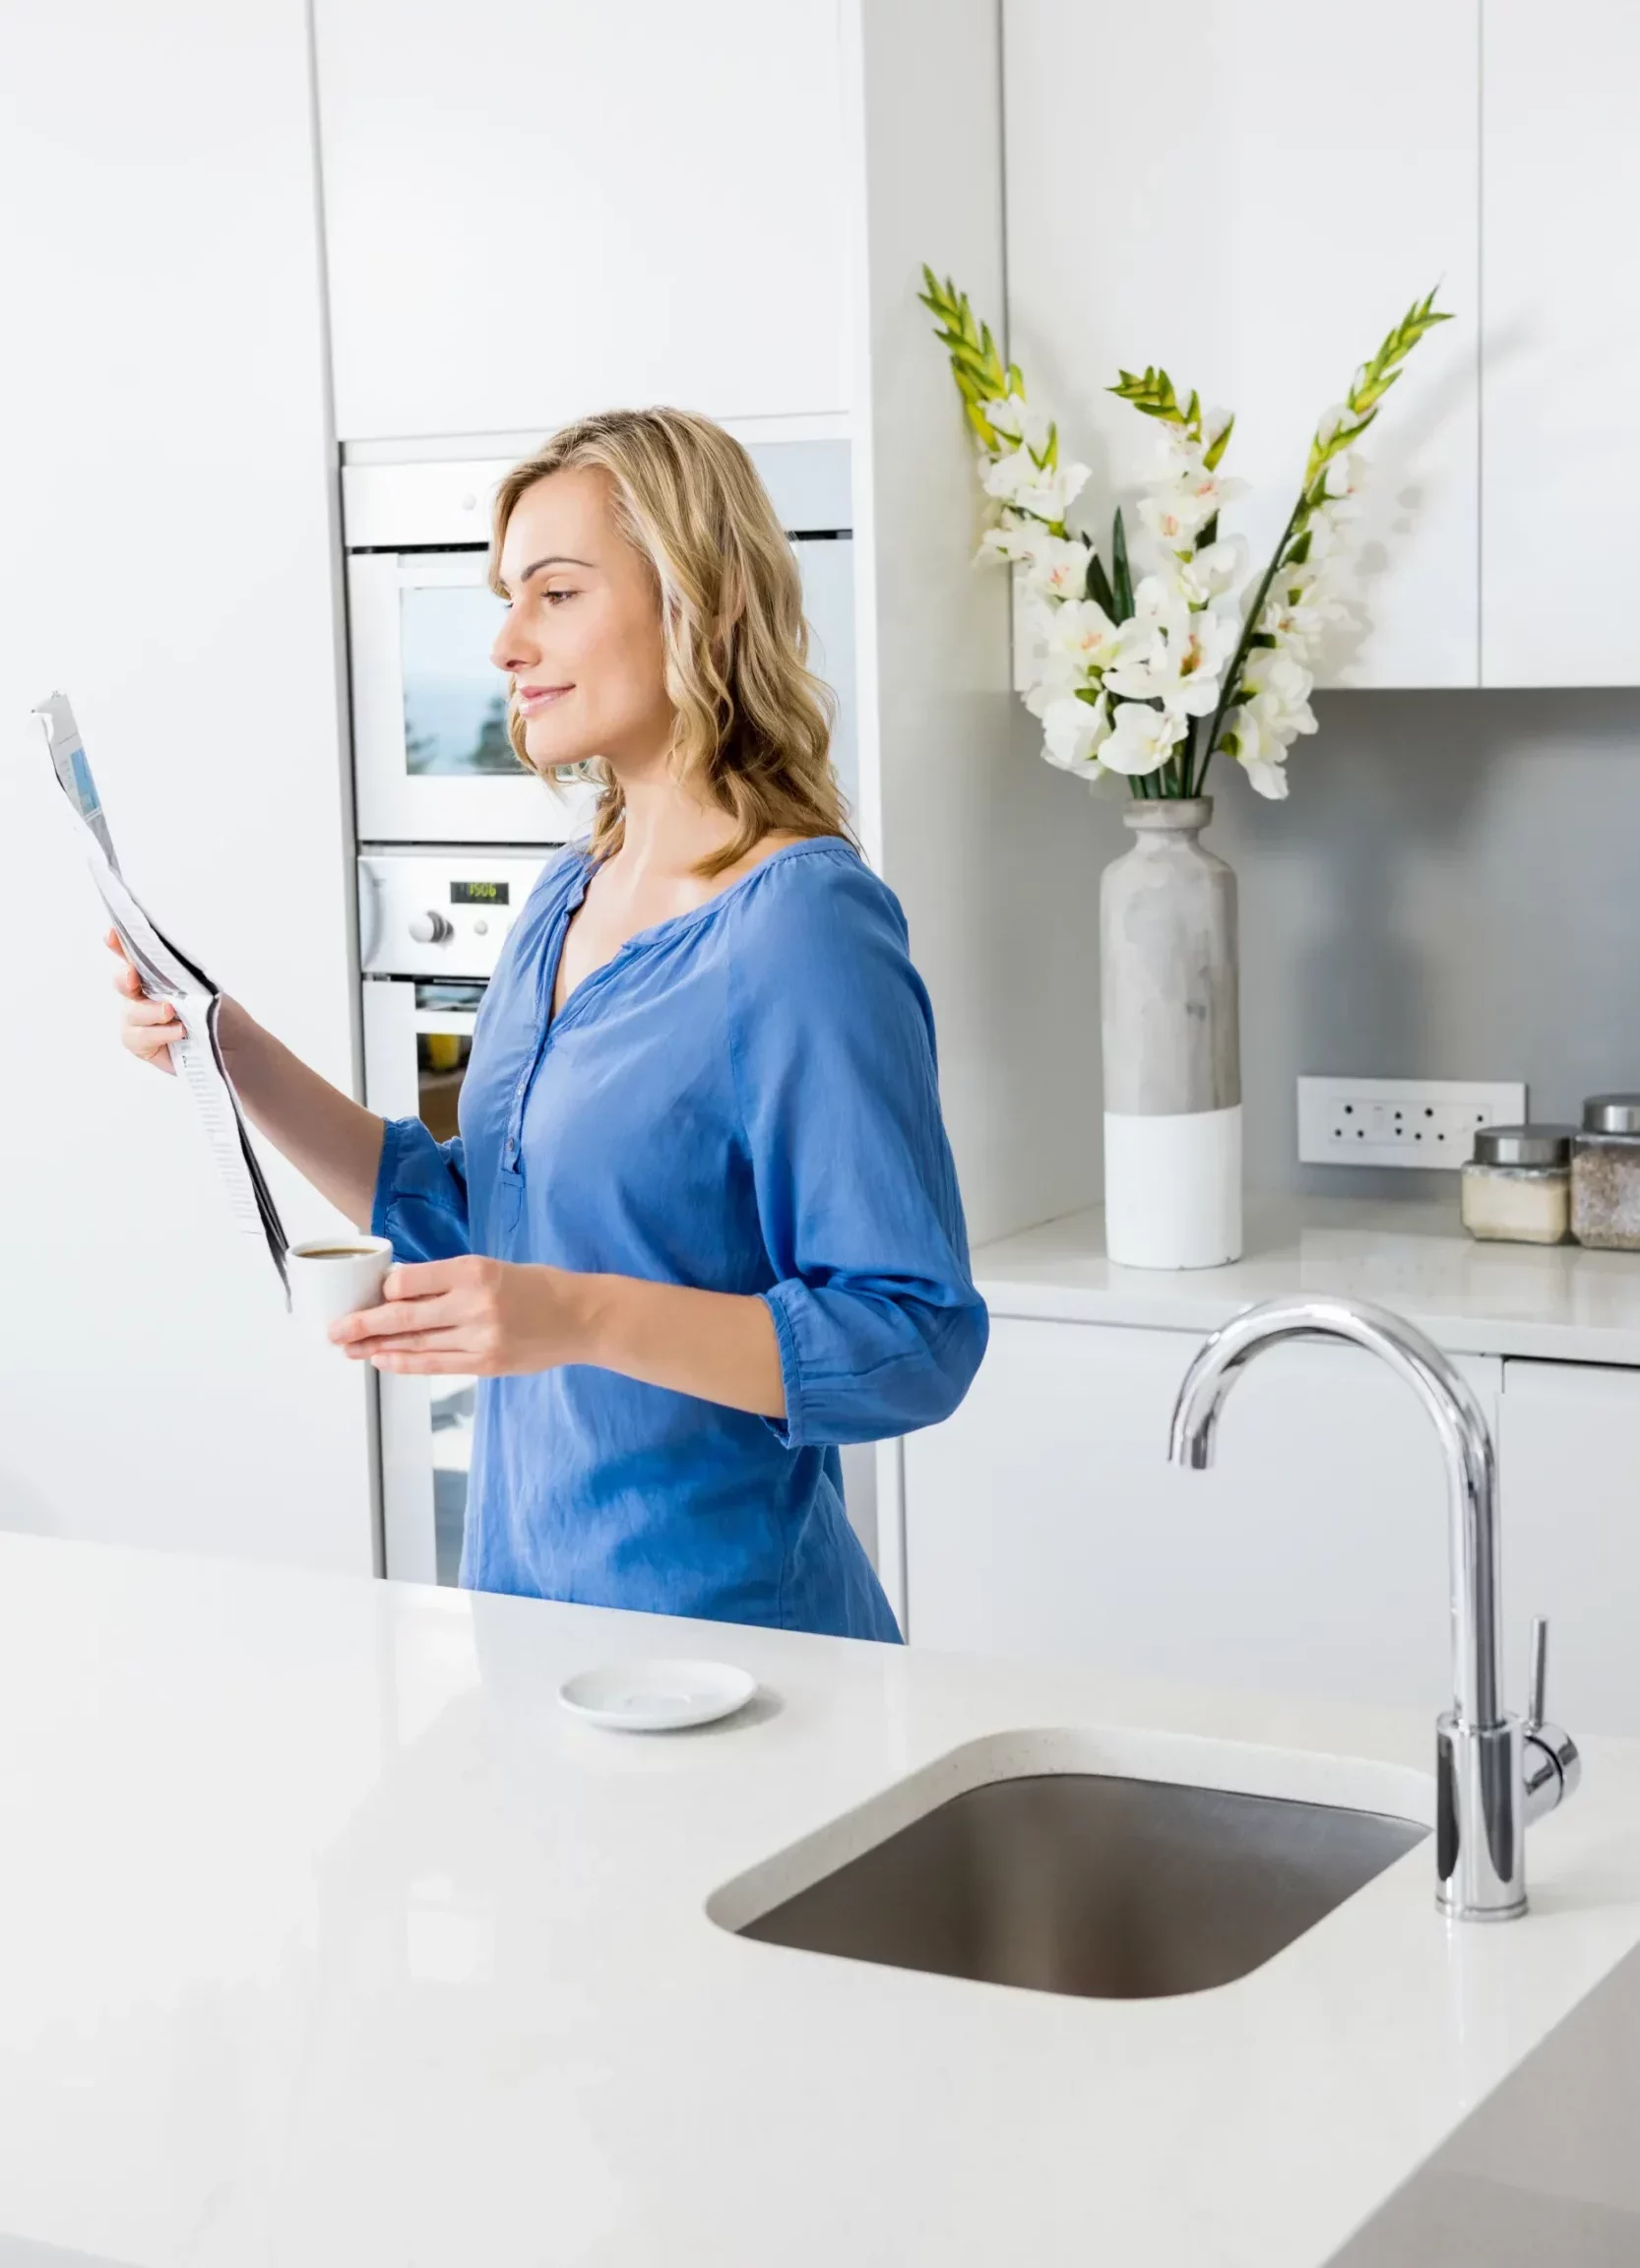 Woman reading news paper in beautifully designed kitchen